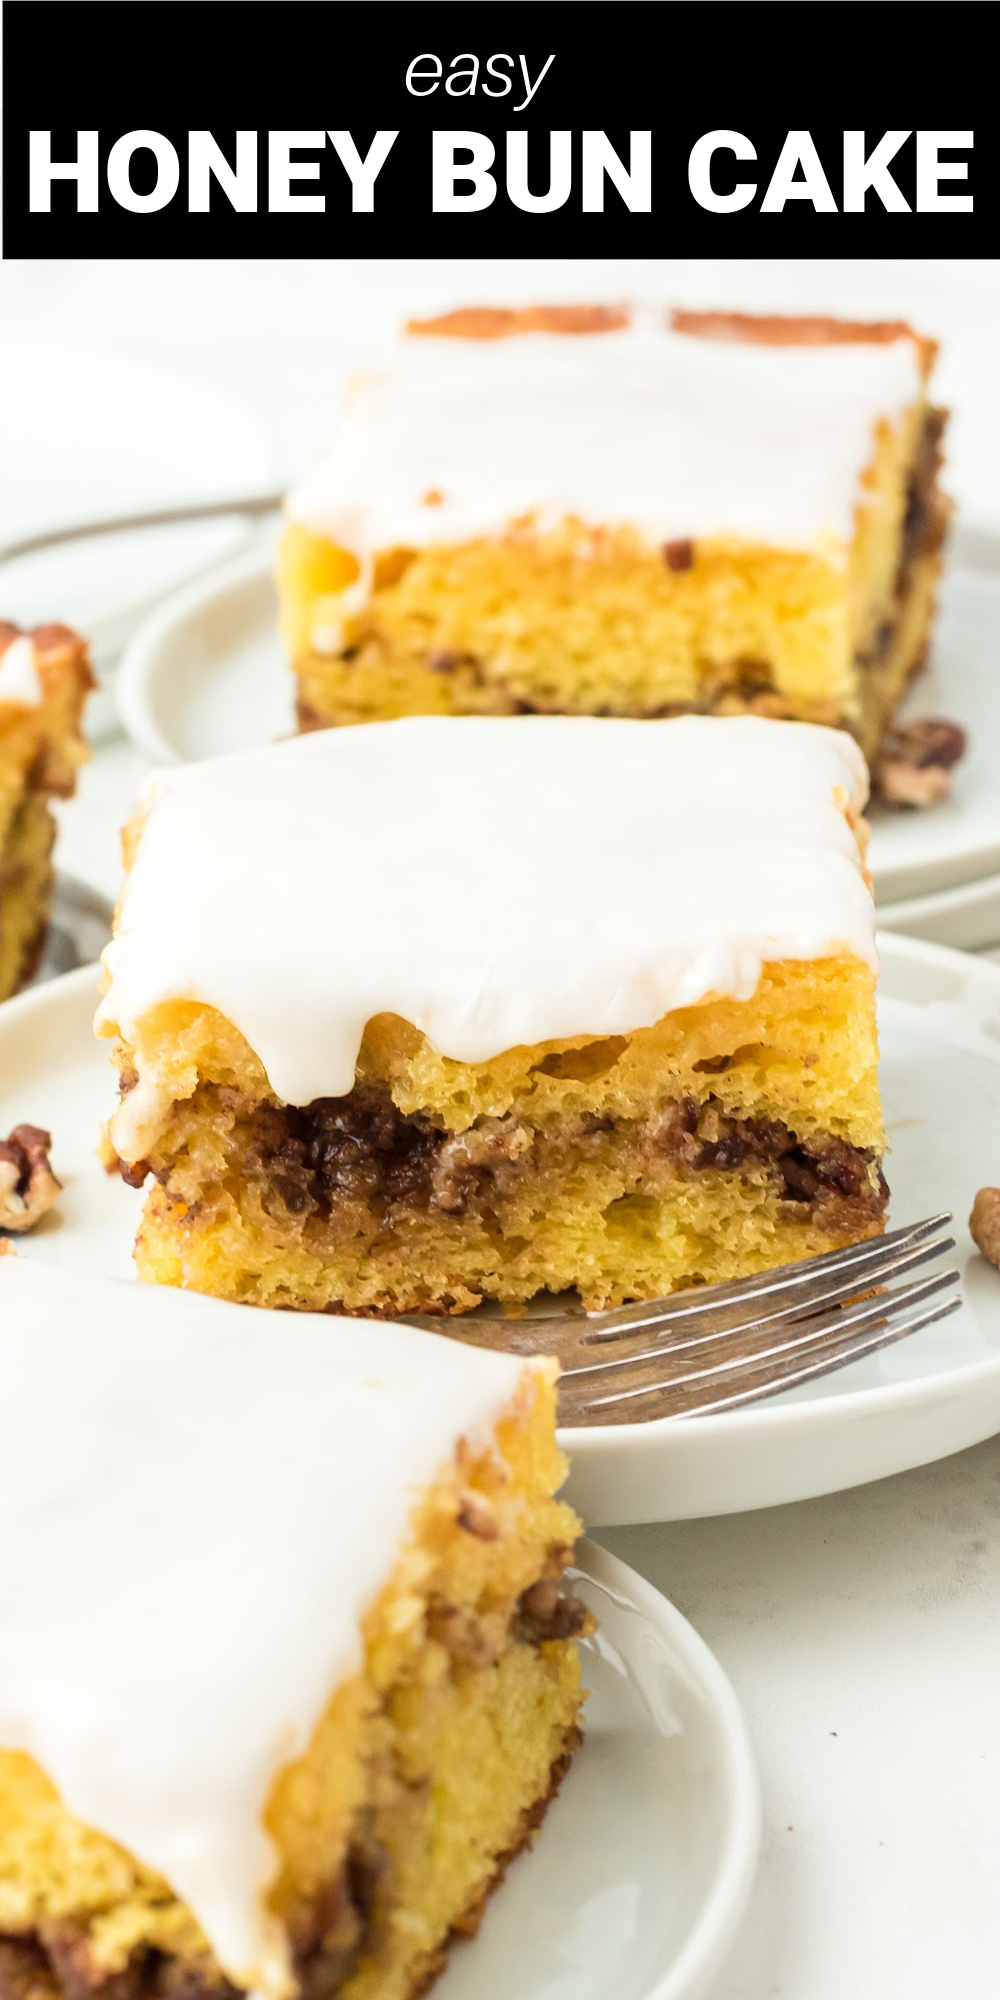 This homemade Honey Bun Cake recipe is a deliciously rich and moist cake that's loaded with brown sugar and cinnamon flavor. Topped with a sweet and sticky vanilla glaze, this cake is the perfect combination of a cinnamon swirl cake and classic poke cake! 